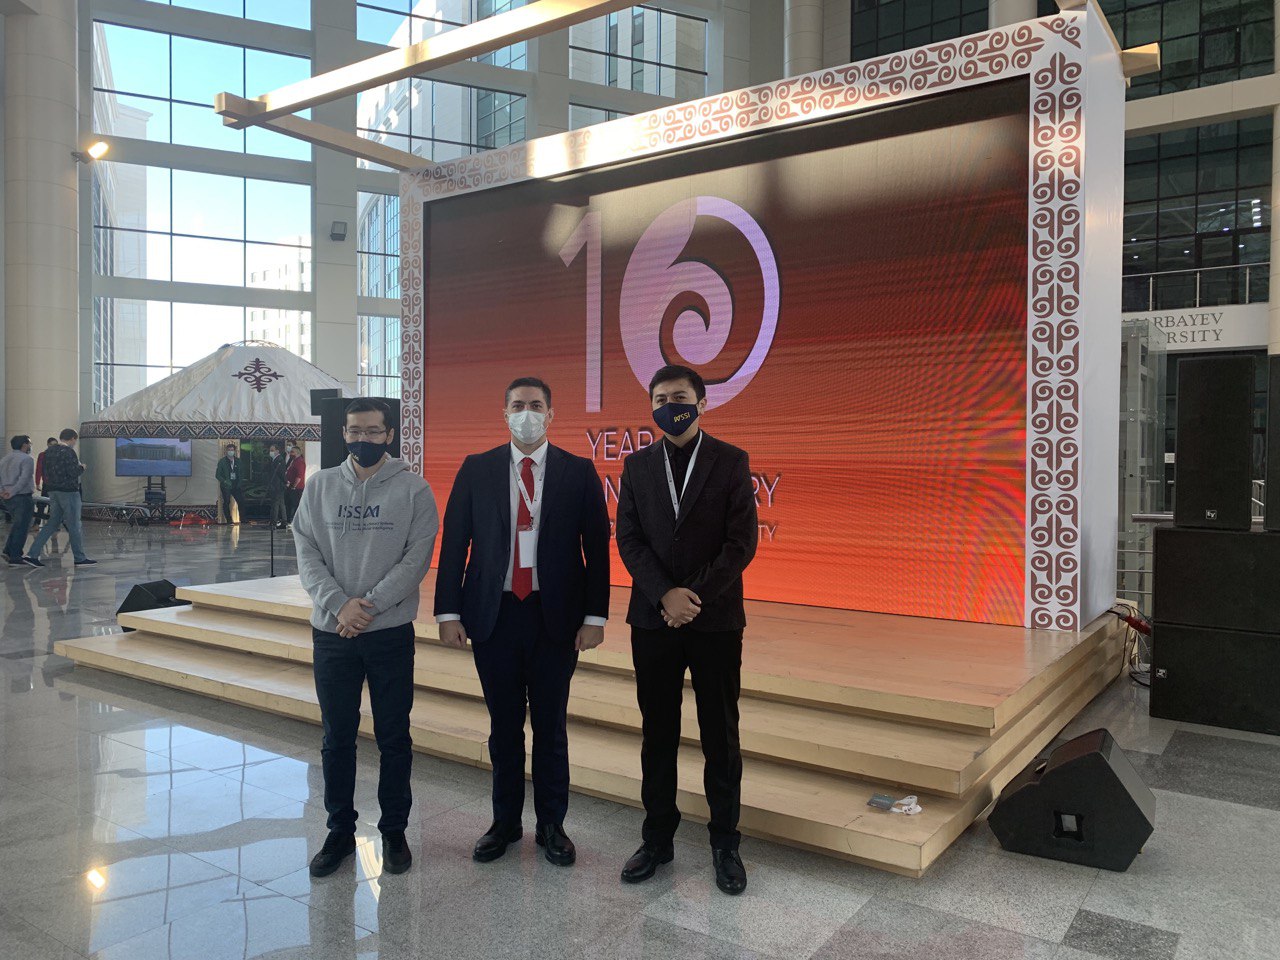 1 December – ISSAI researchers presented their projects to Mr. Massimov